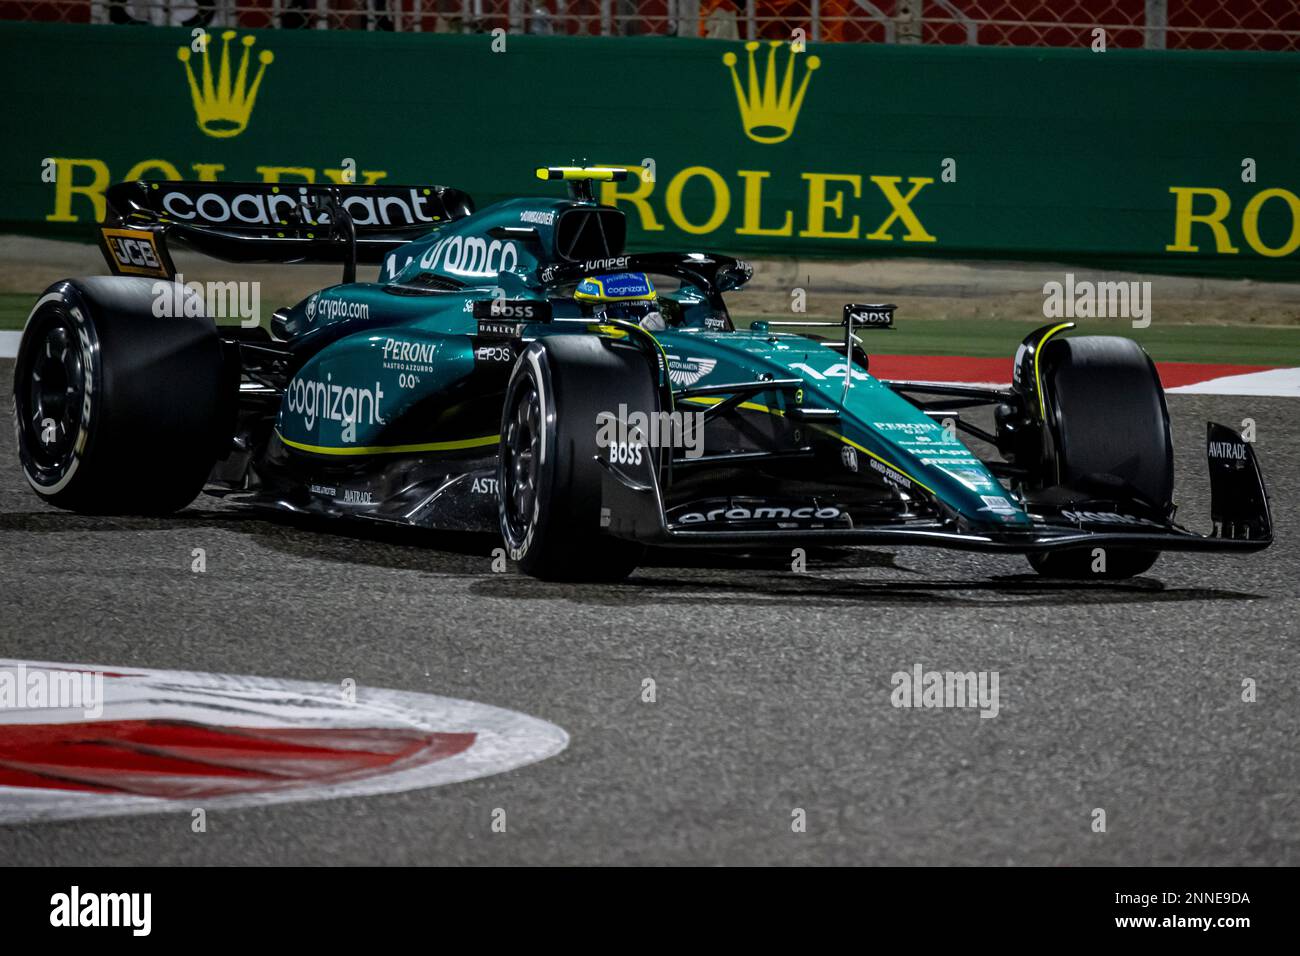 Sakhir, Bahrain, 25th Feb 2023, Fernando Alonso, from Spain competes for Aston Martin F1 . Winter Testing, the winter testing of the 2023 Formula 1 championship. Credit: Michael Potts/Alamy Live News Stock Photo